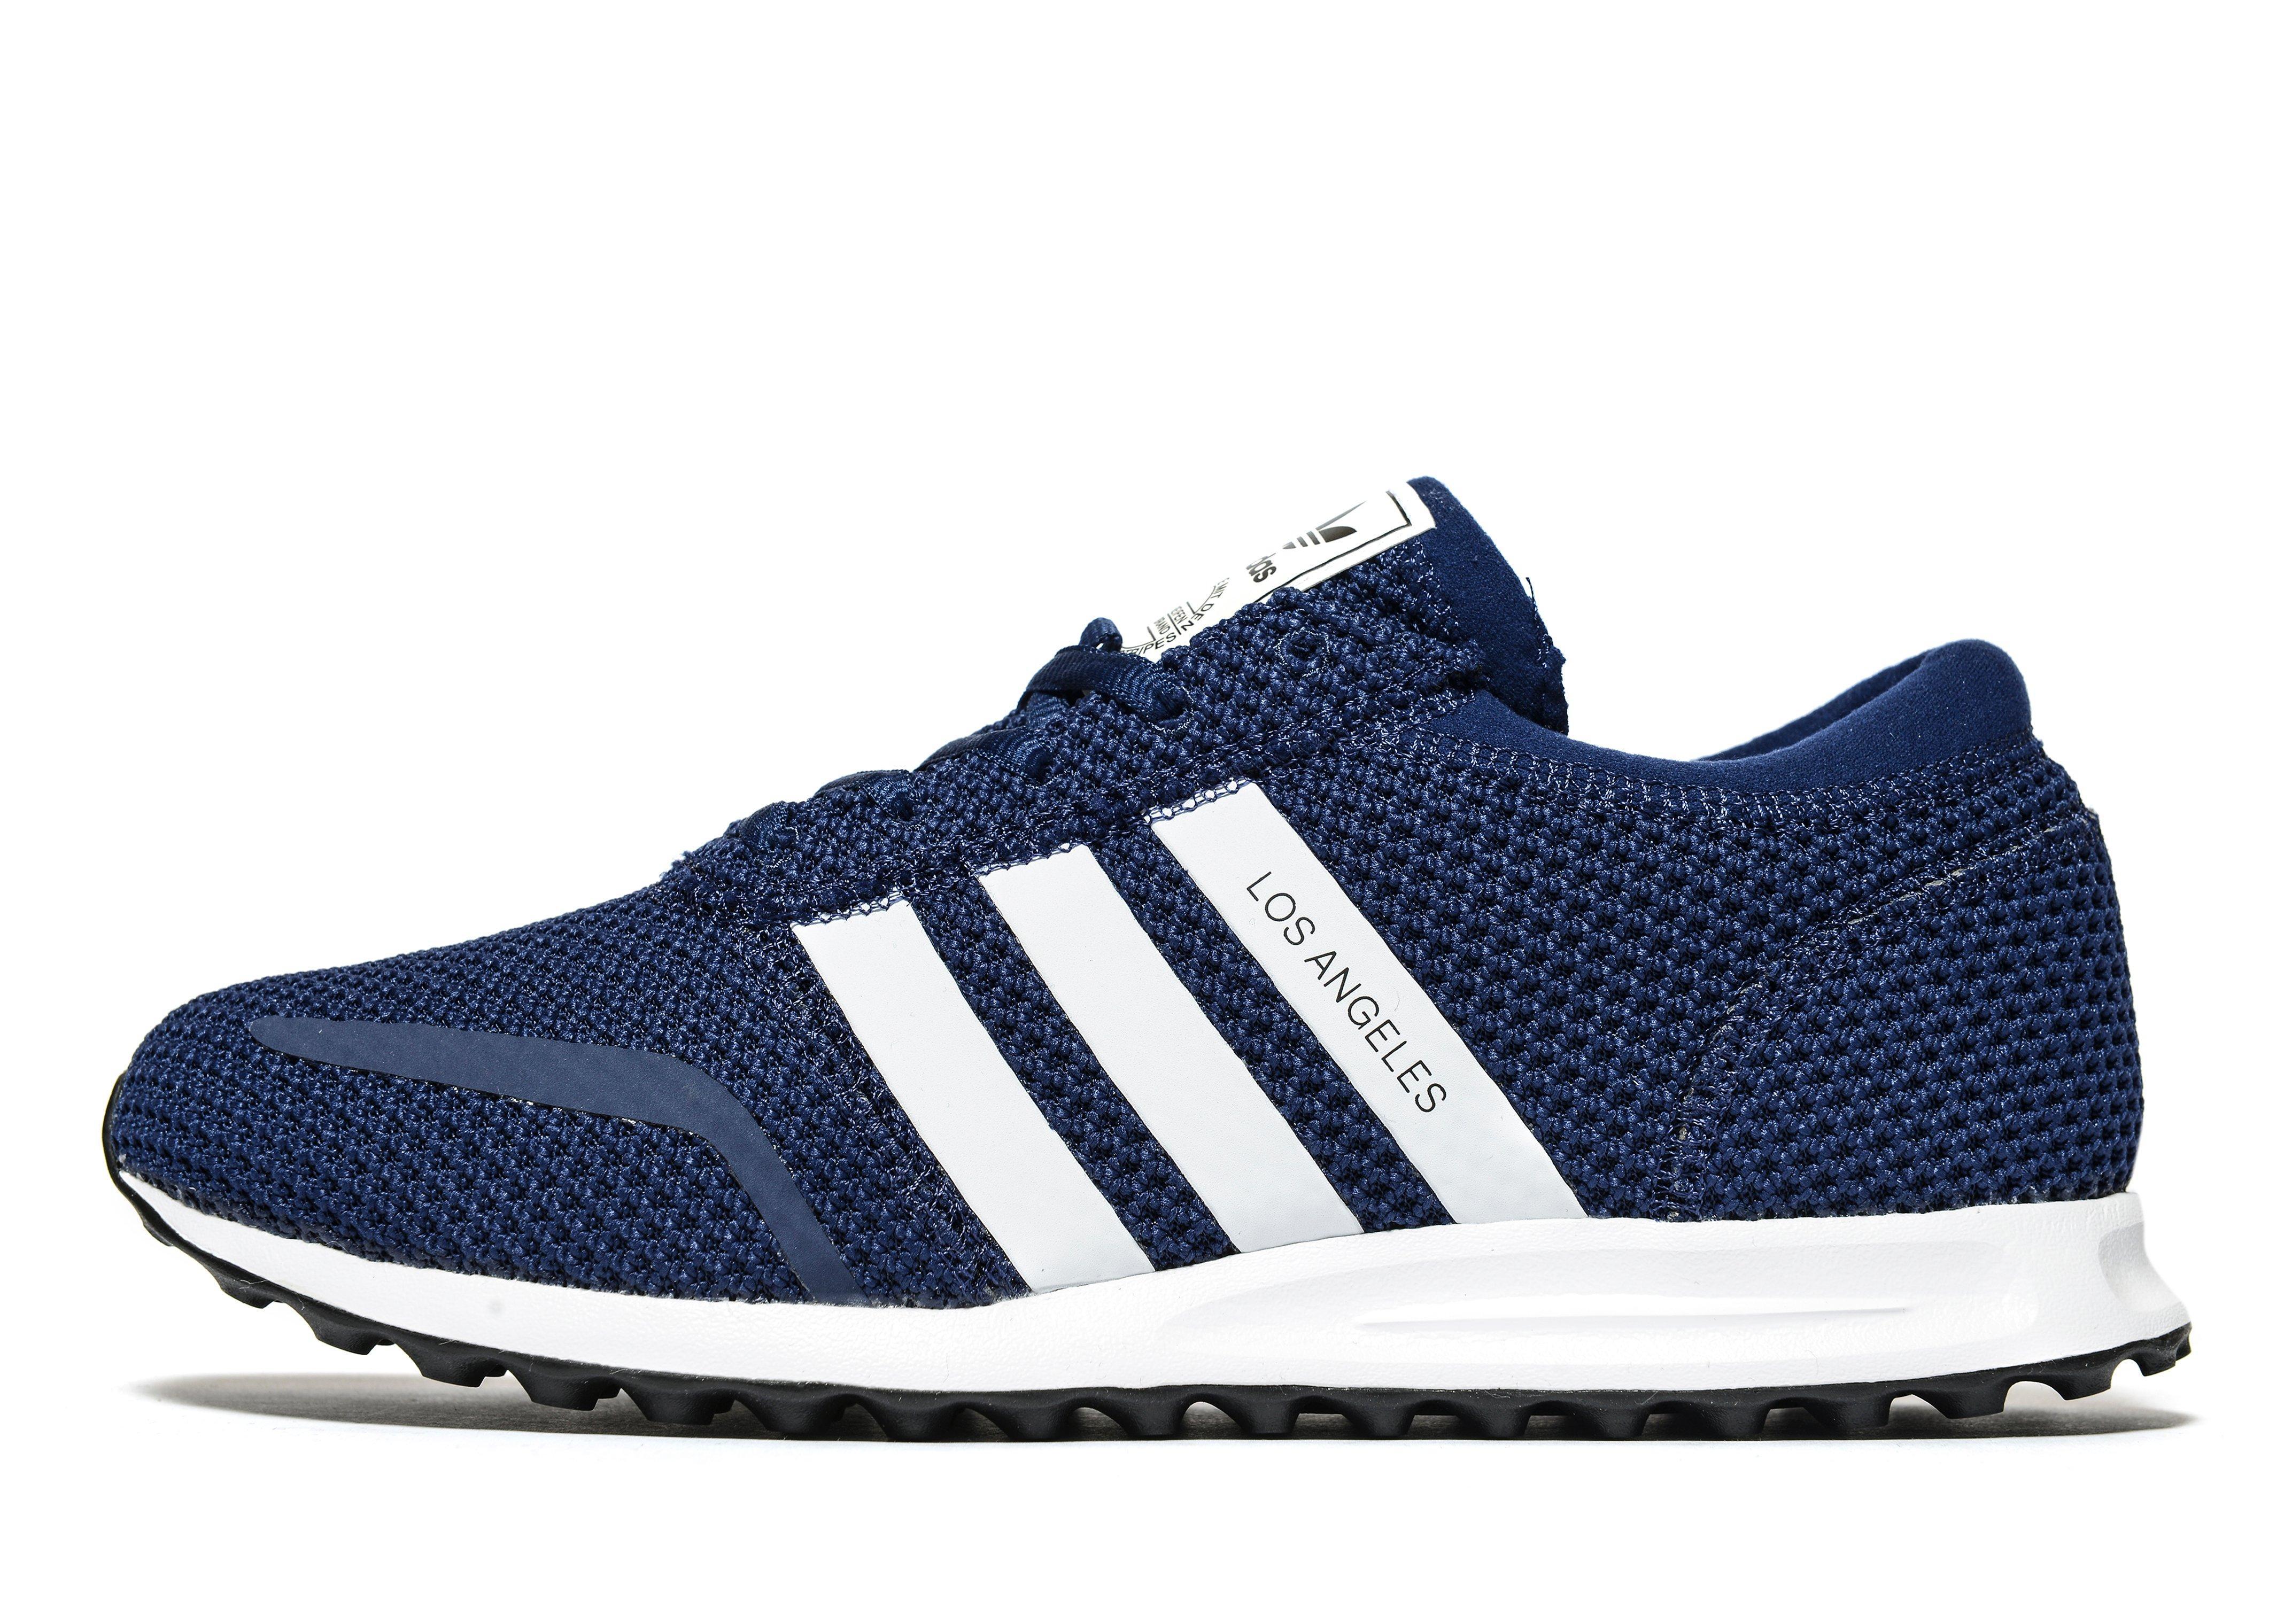 adidas Originals Rubber Los Angeles Ck in Navy/White (Blue) for Men - Lyst